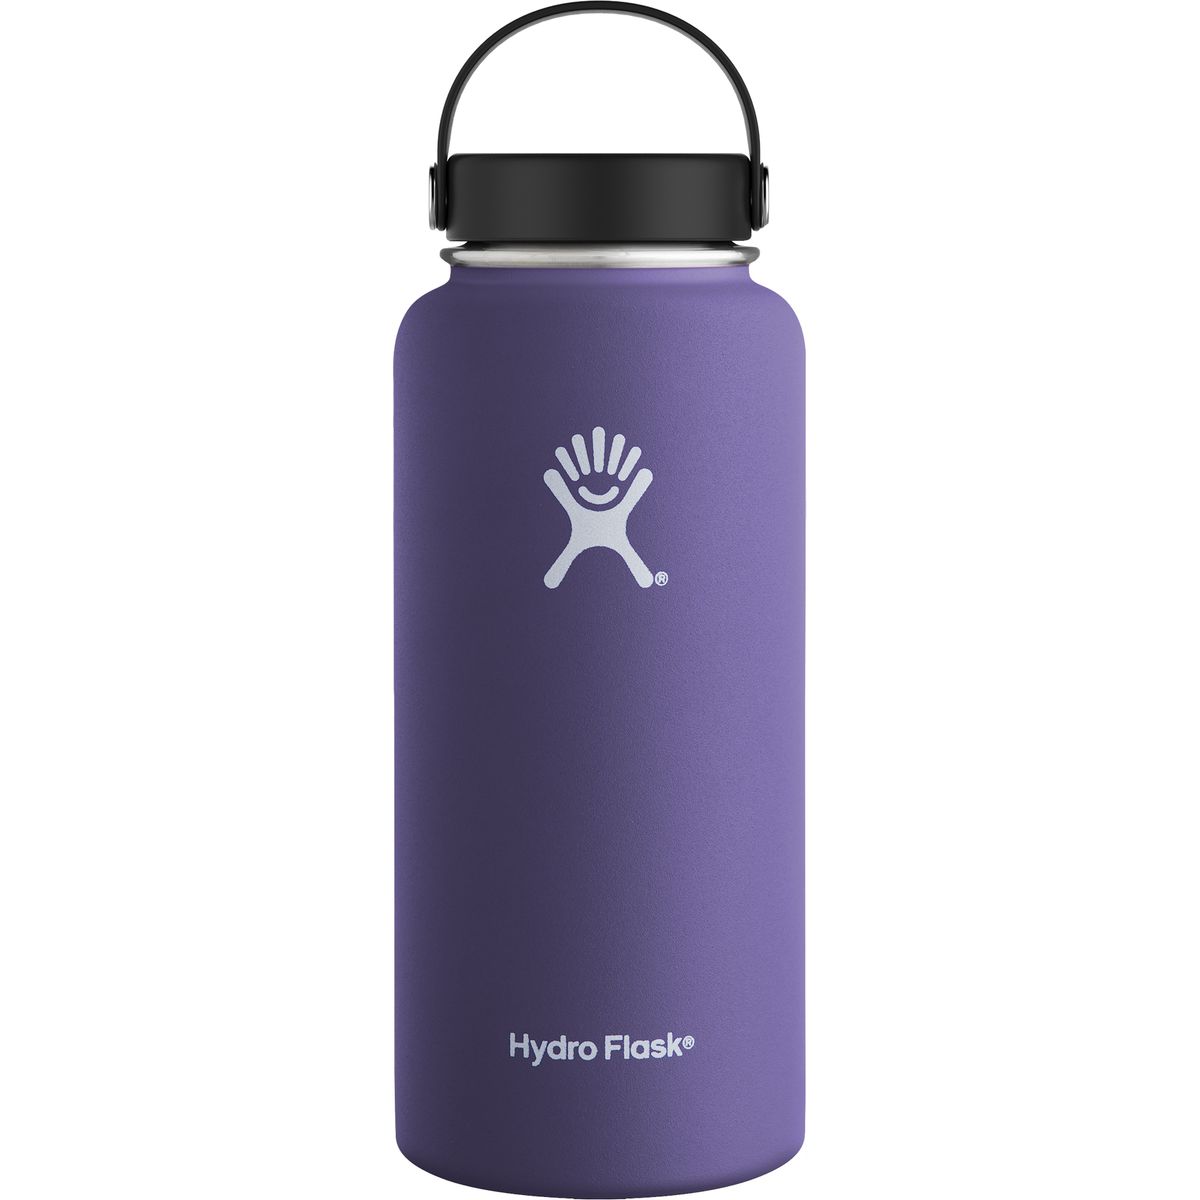 Hydro Flask 32oz Wide Mouth Water Bottle Plum, One Size